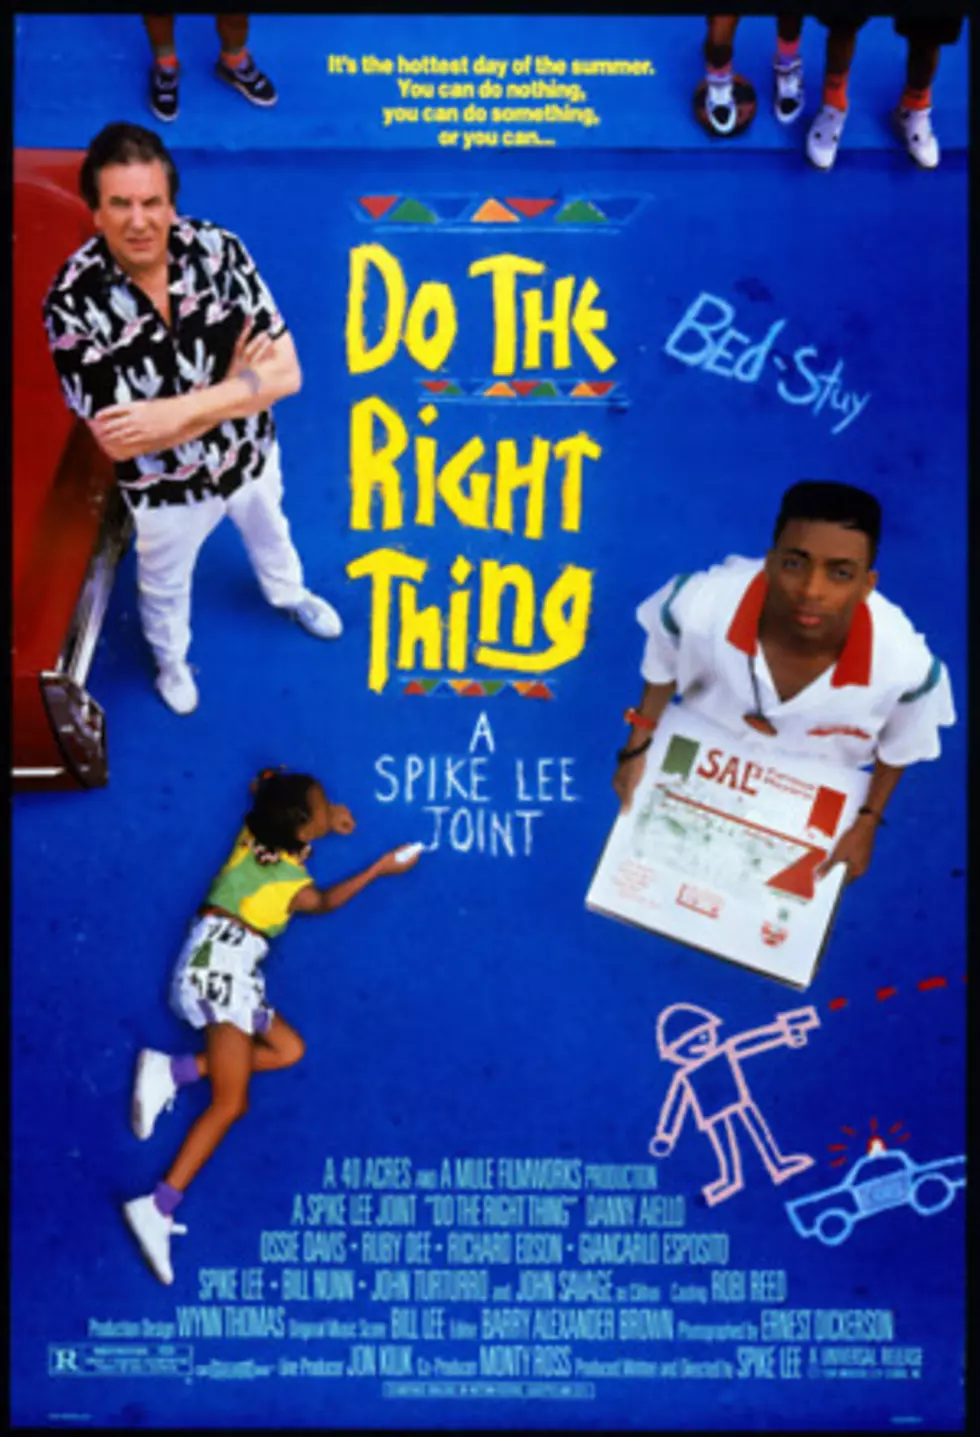 Do The Right Thing Showing This Weekend at the Madison Theater